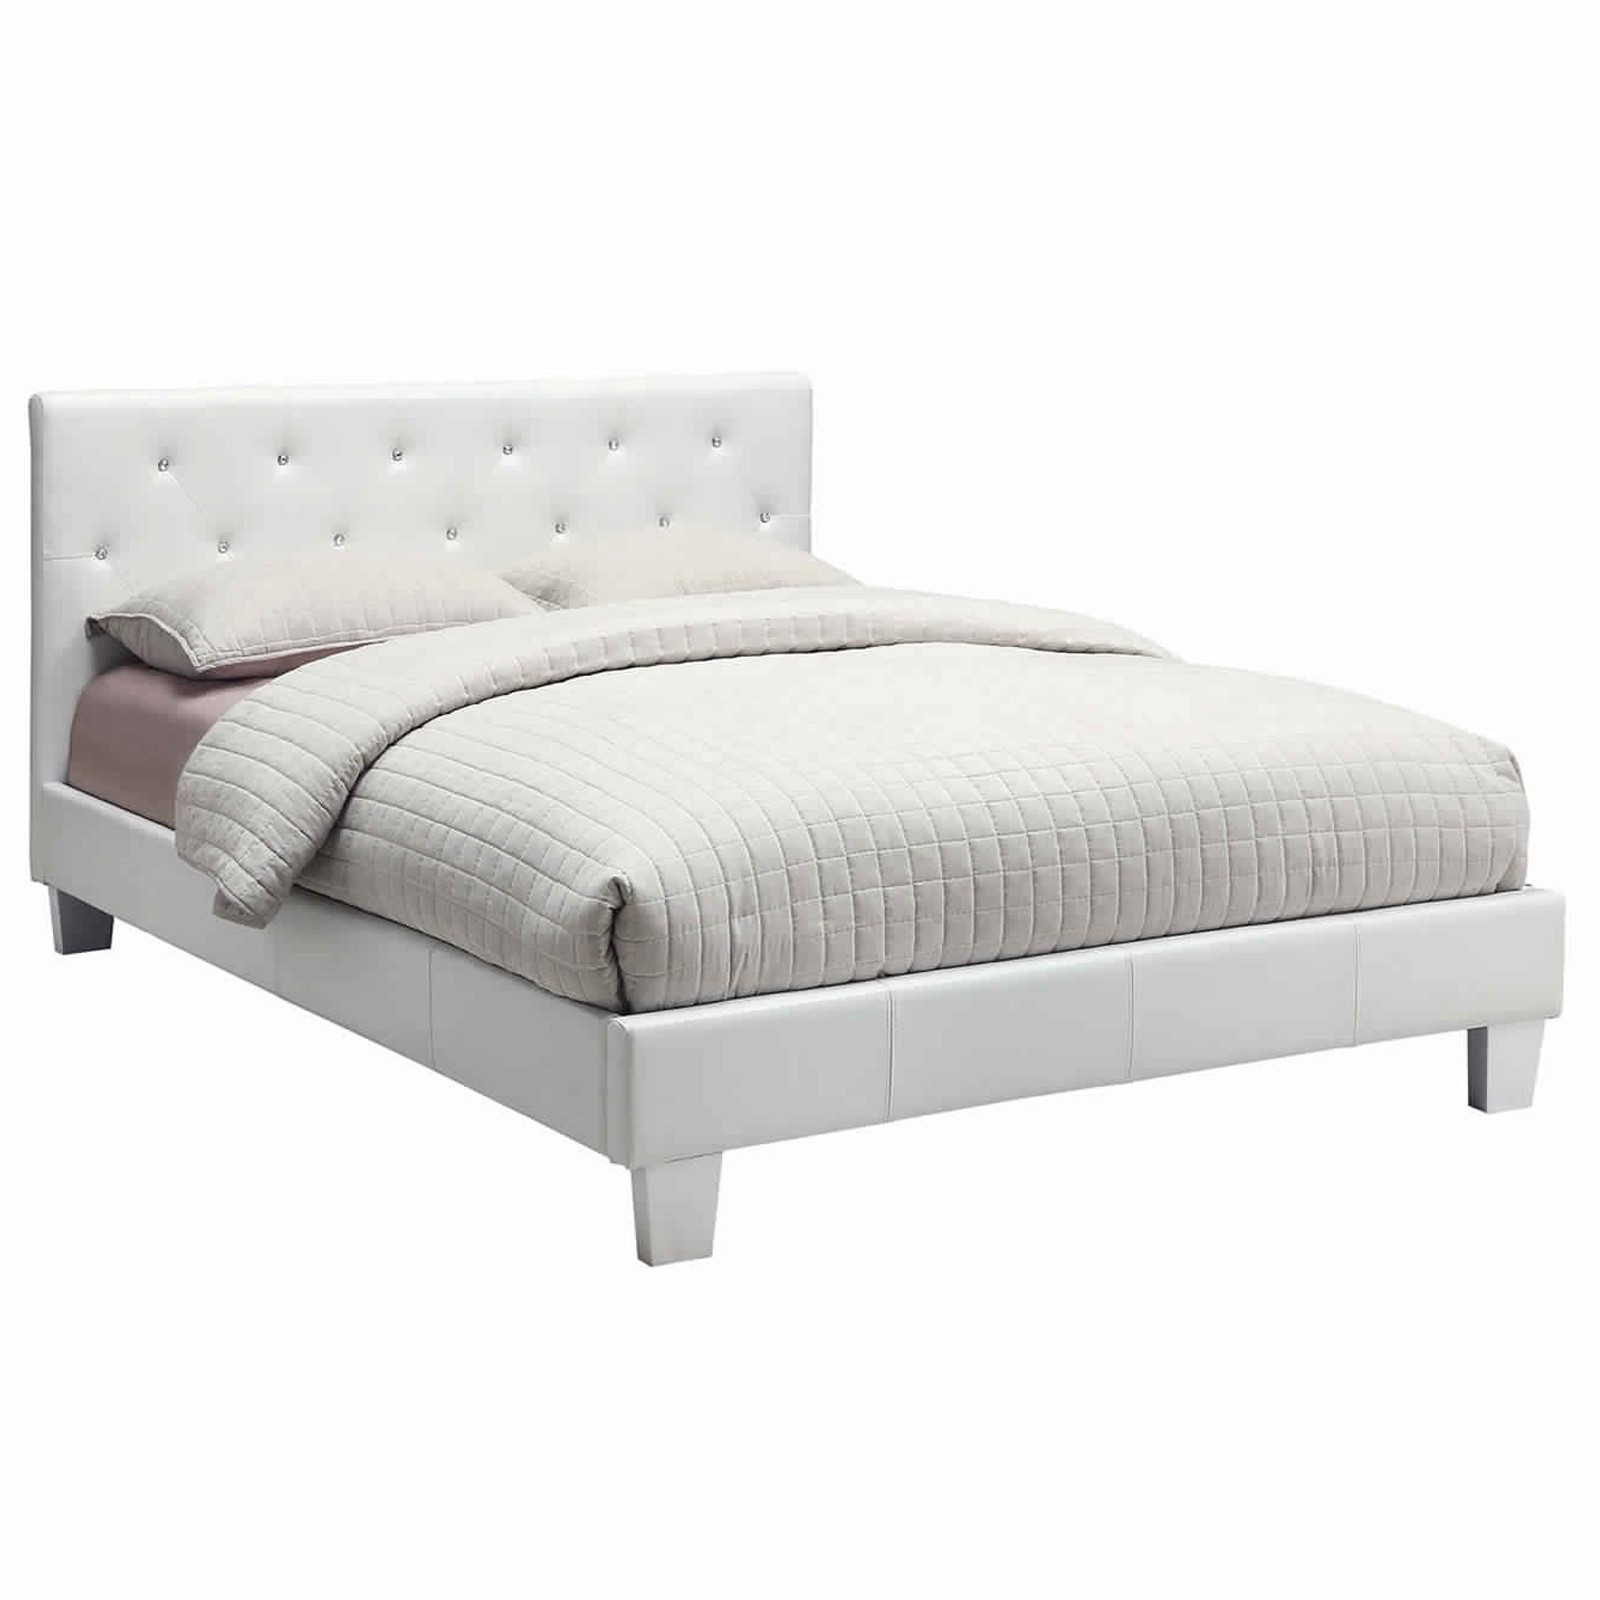 Benzara low profile queen size bed with button tufted